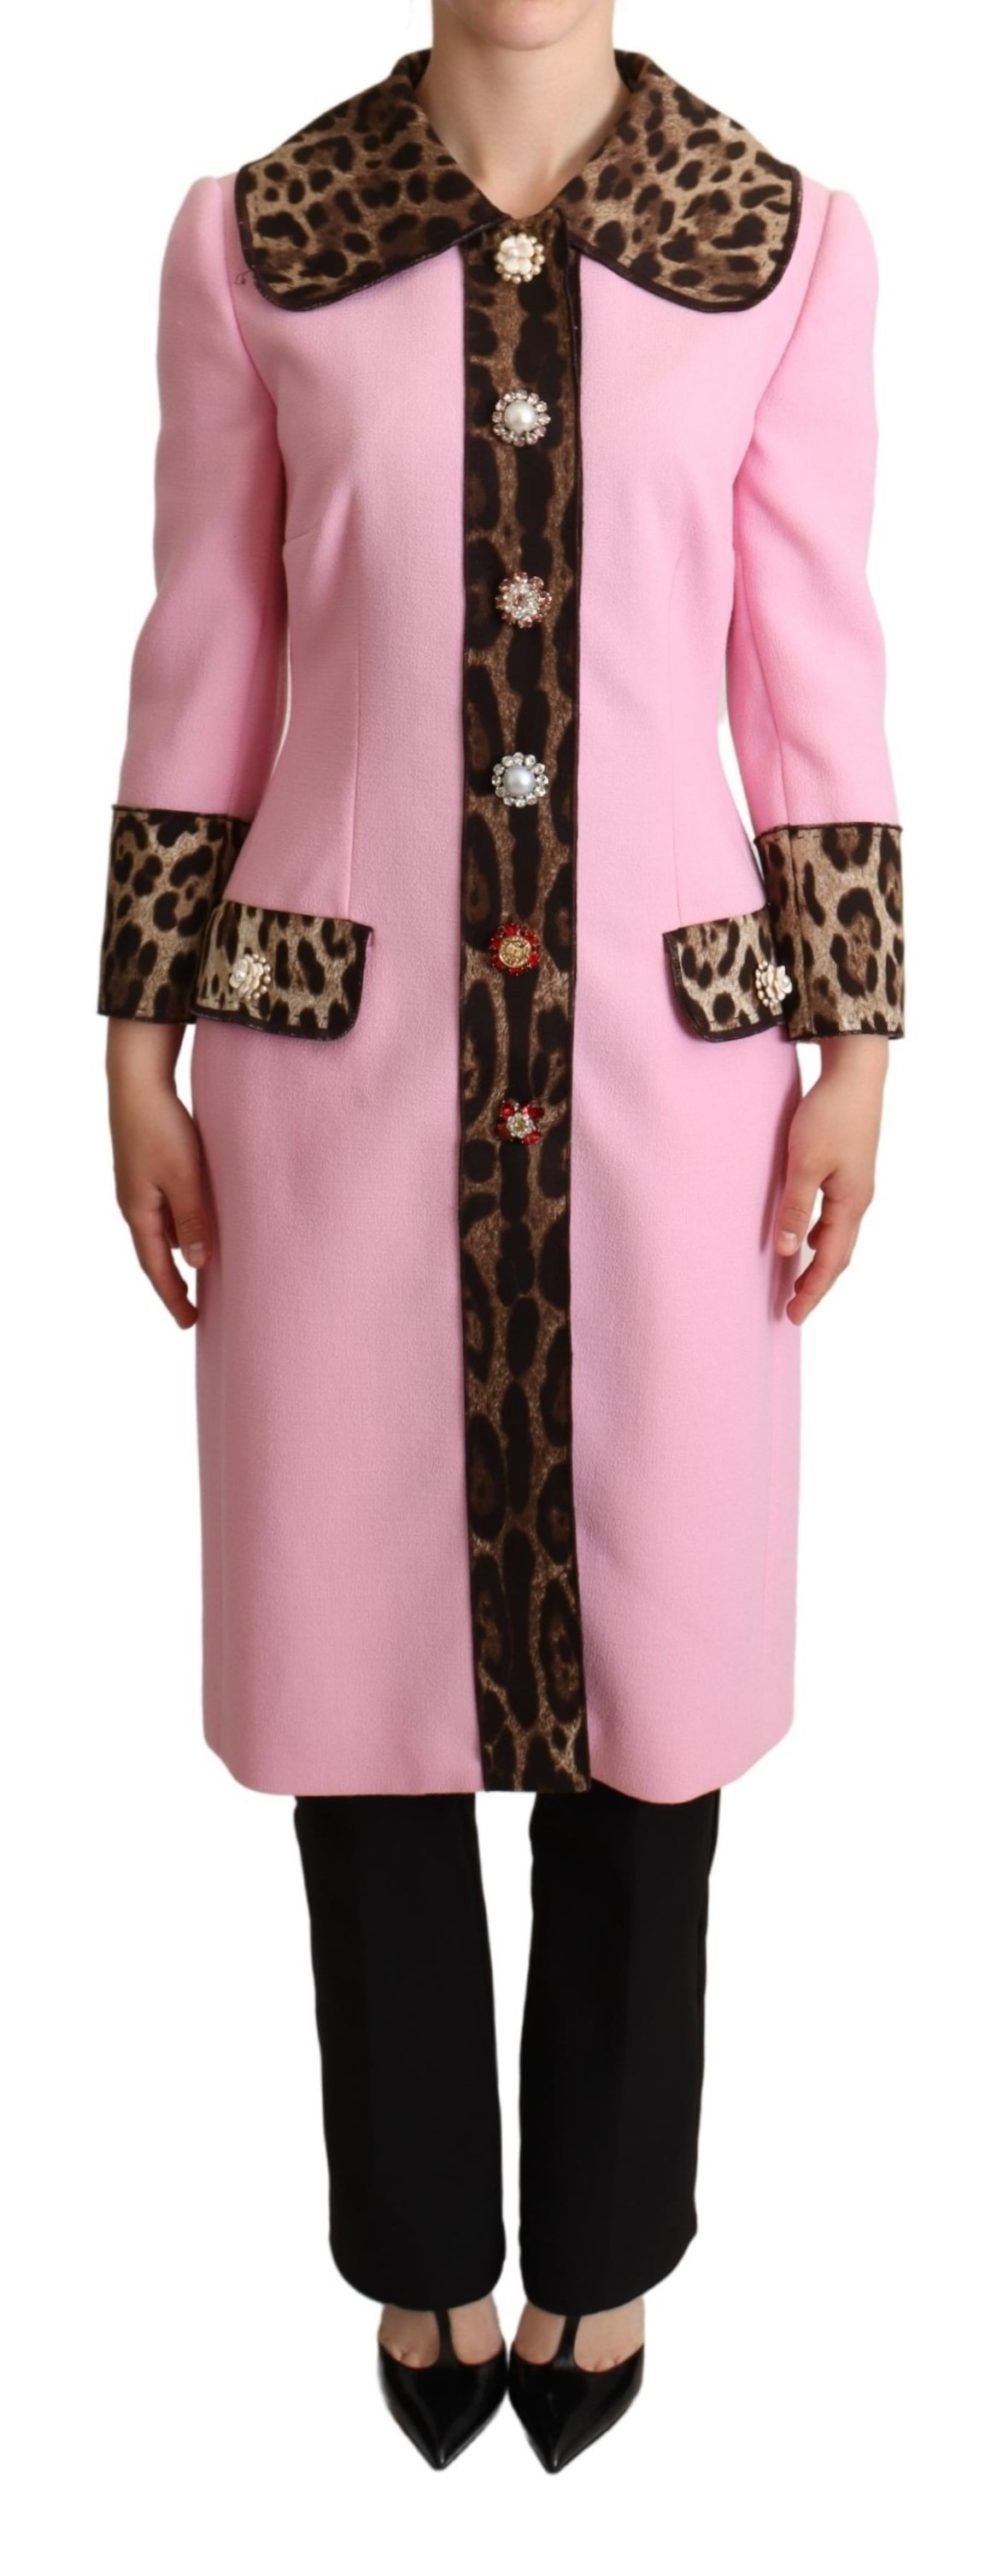 Chic Pink Leopard Trench with Crystal Buttons